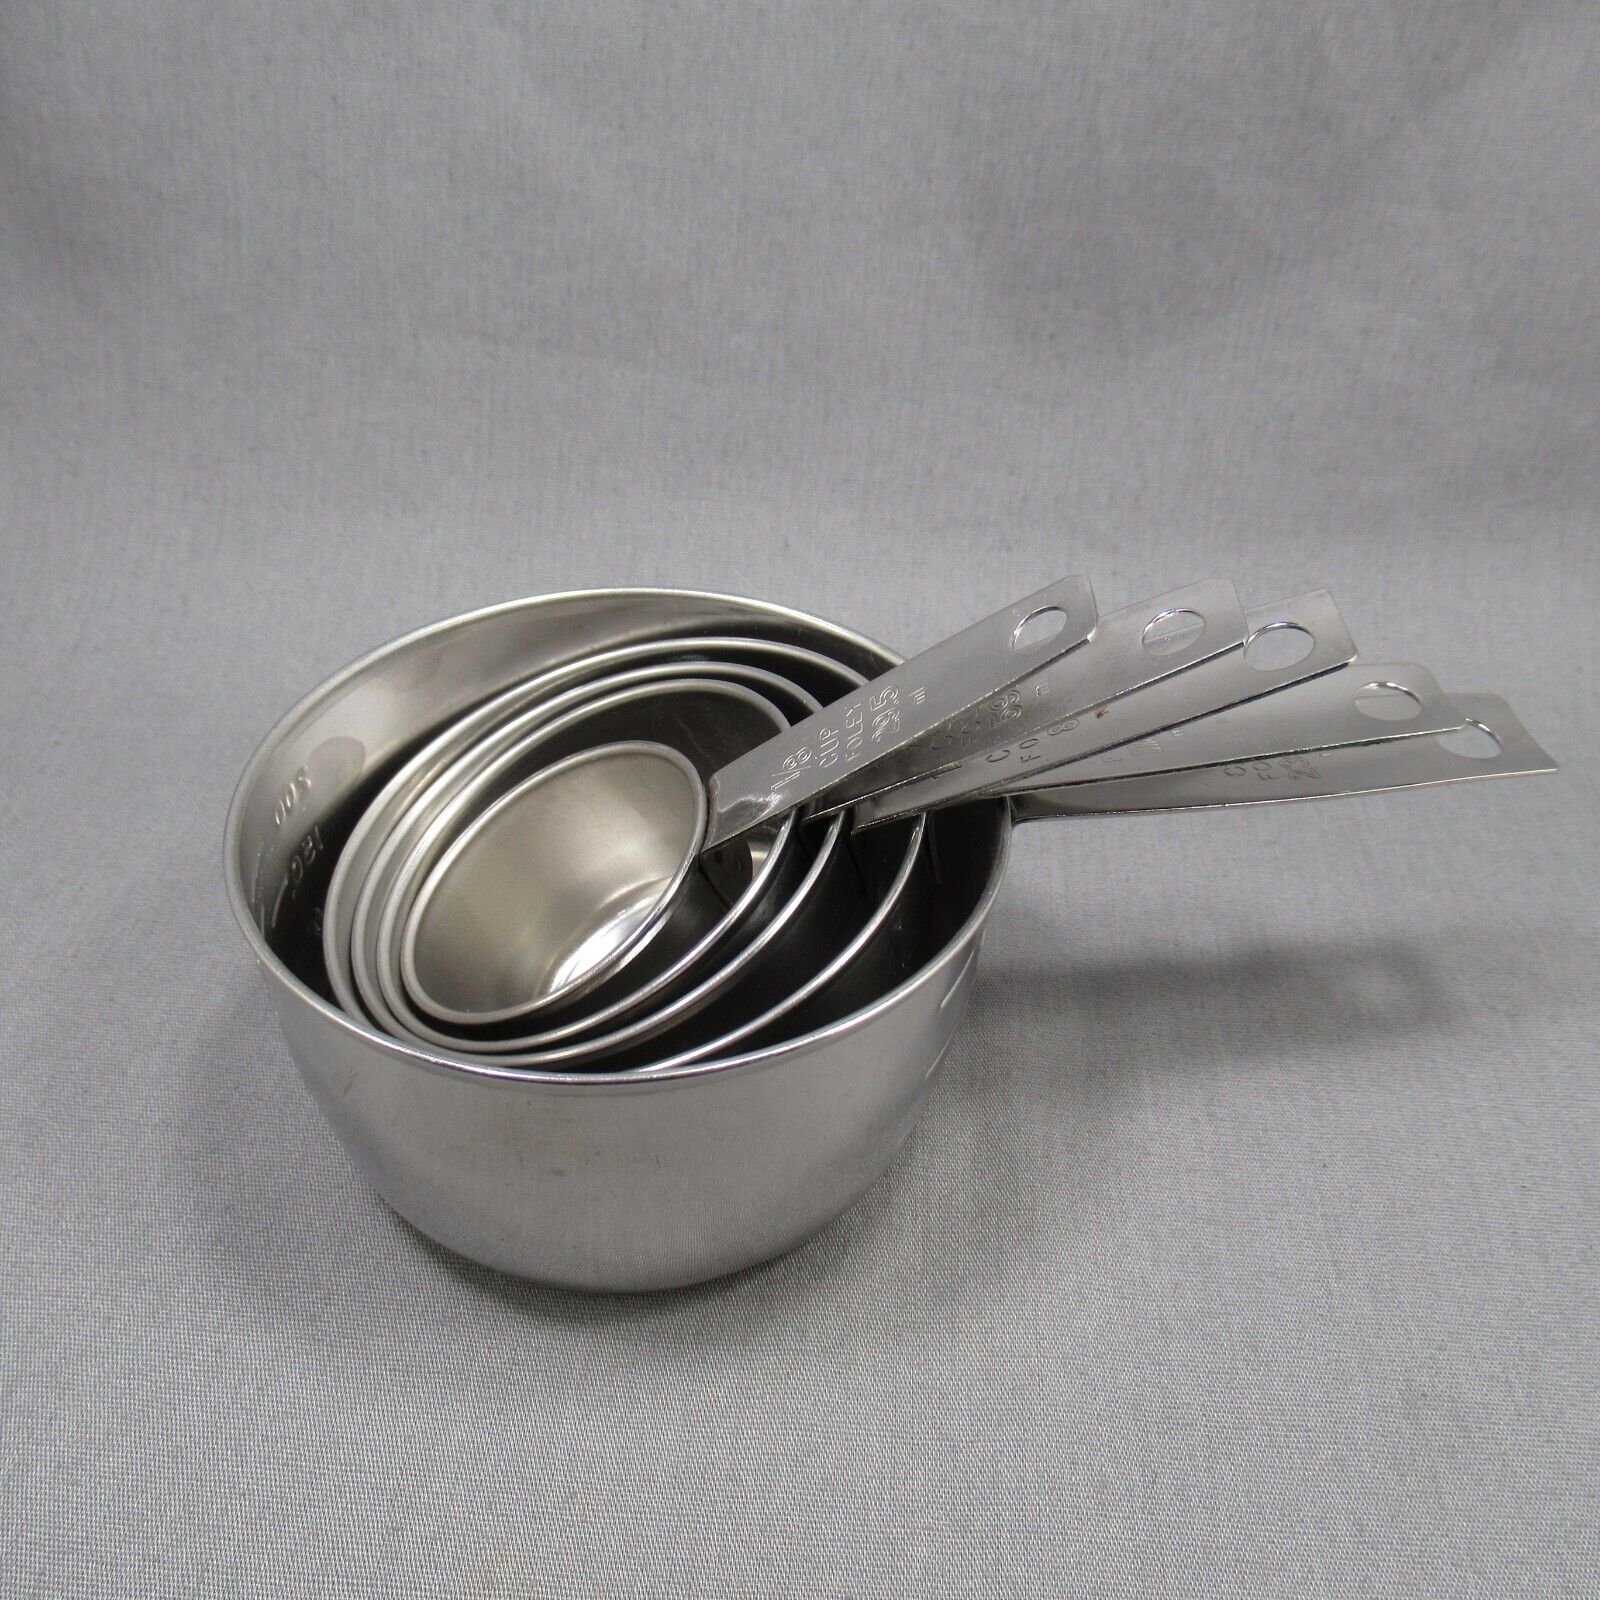 Vintage Foley Stainless Steel Measuring Cups 1/8 C - 1 Cup Set Of 5